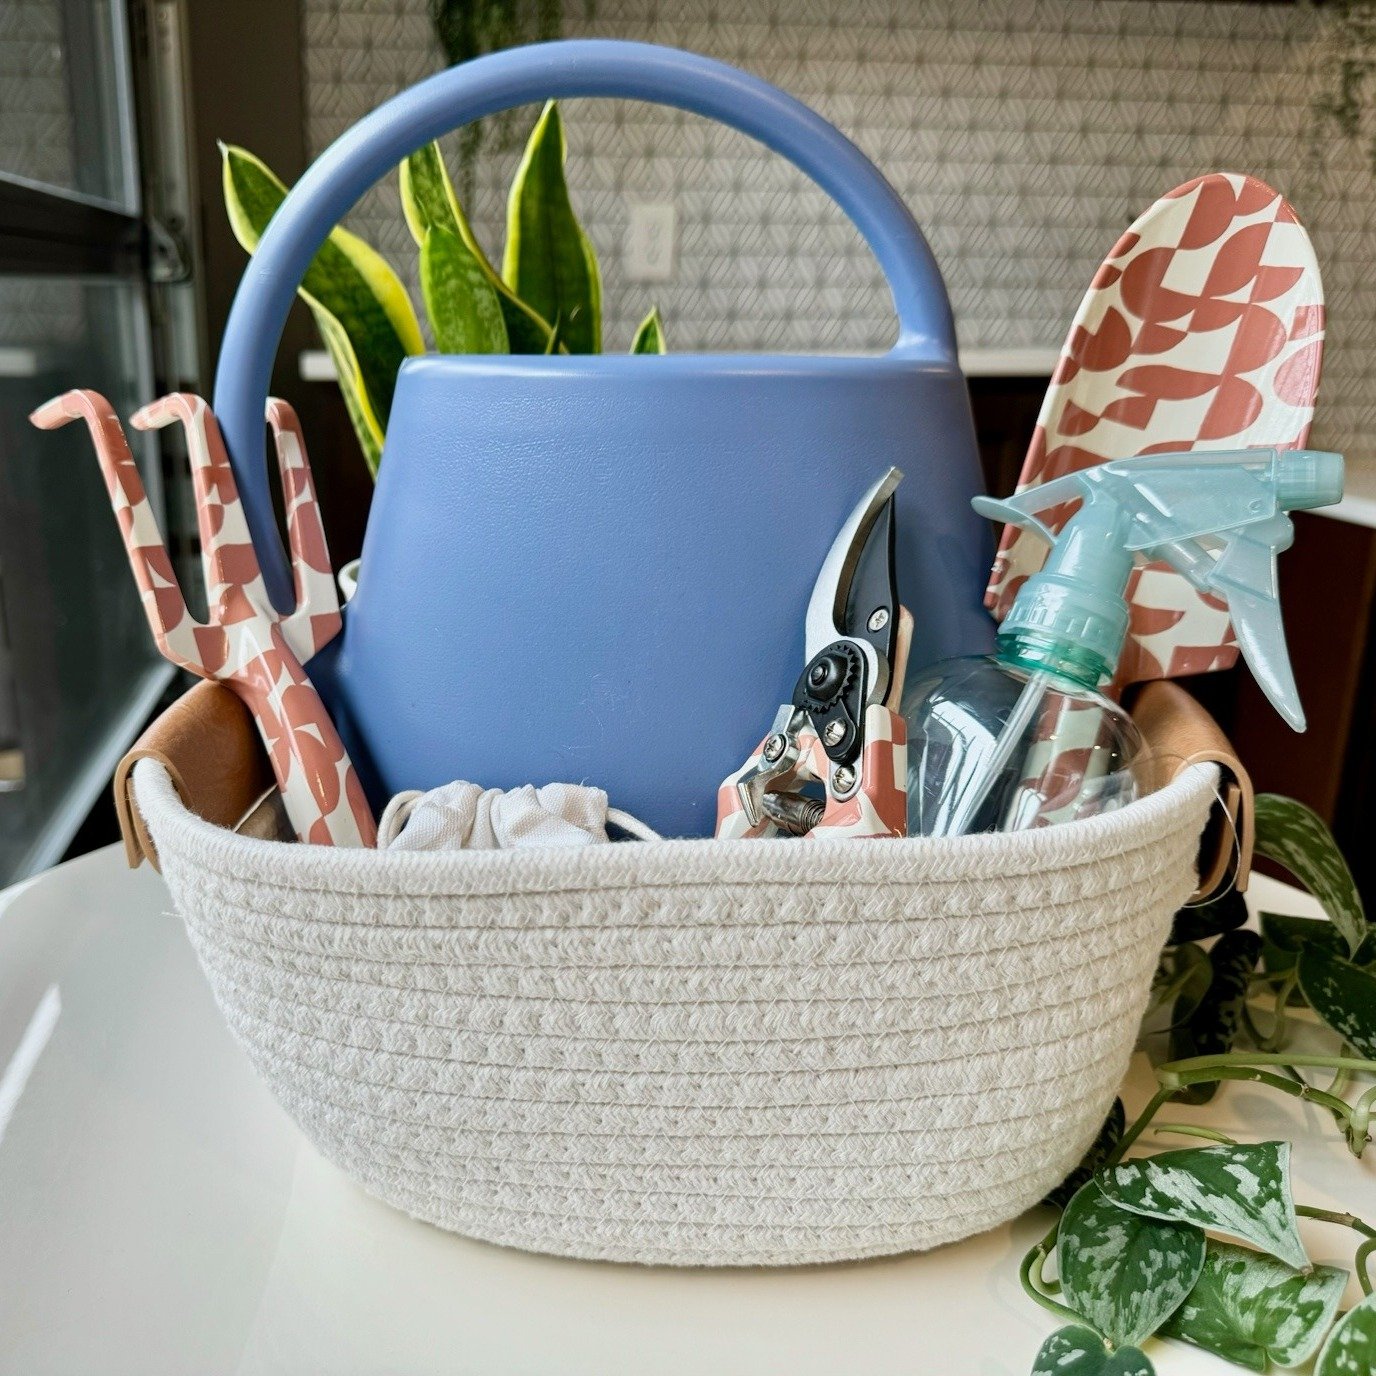 It's giveaway time! We're giving away a gardening basket, perfect for the plant parents or balcony gardeners! This basket includes a watering can, a mister, pruning shears, gardening tools, and more. Here's how to enter:

- You must be a current or f